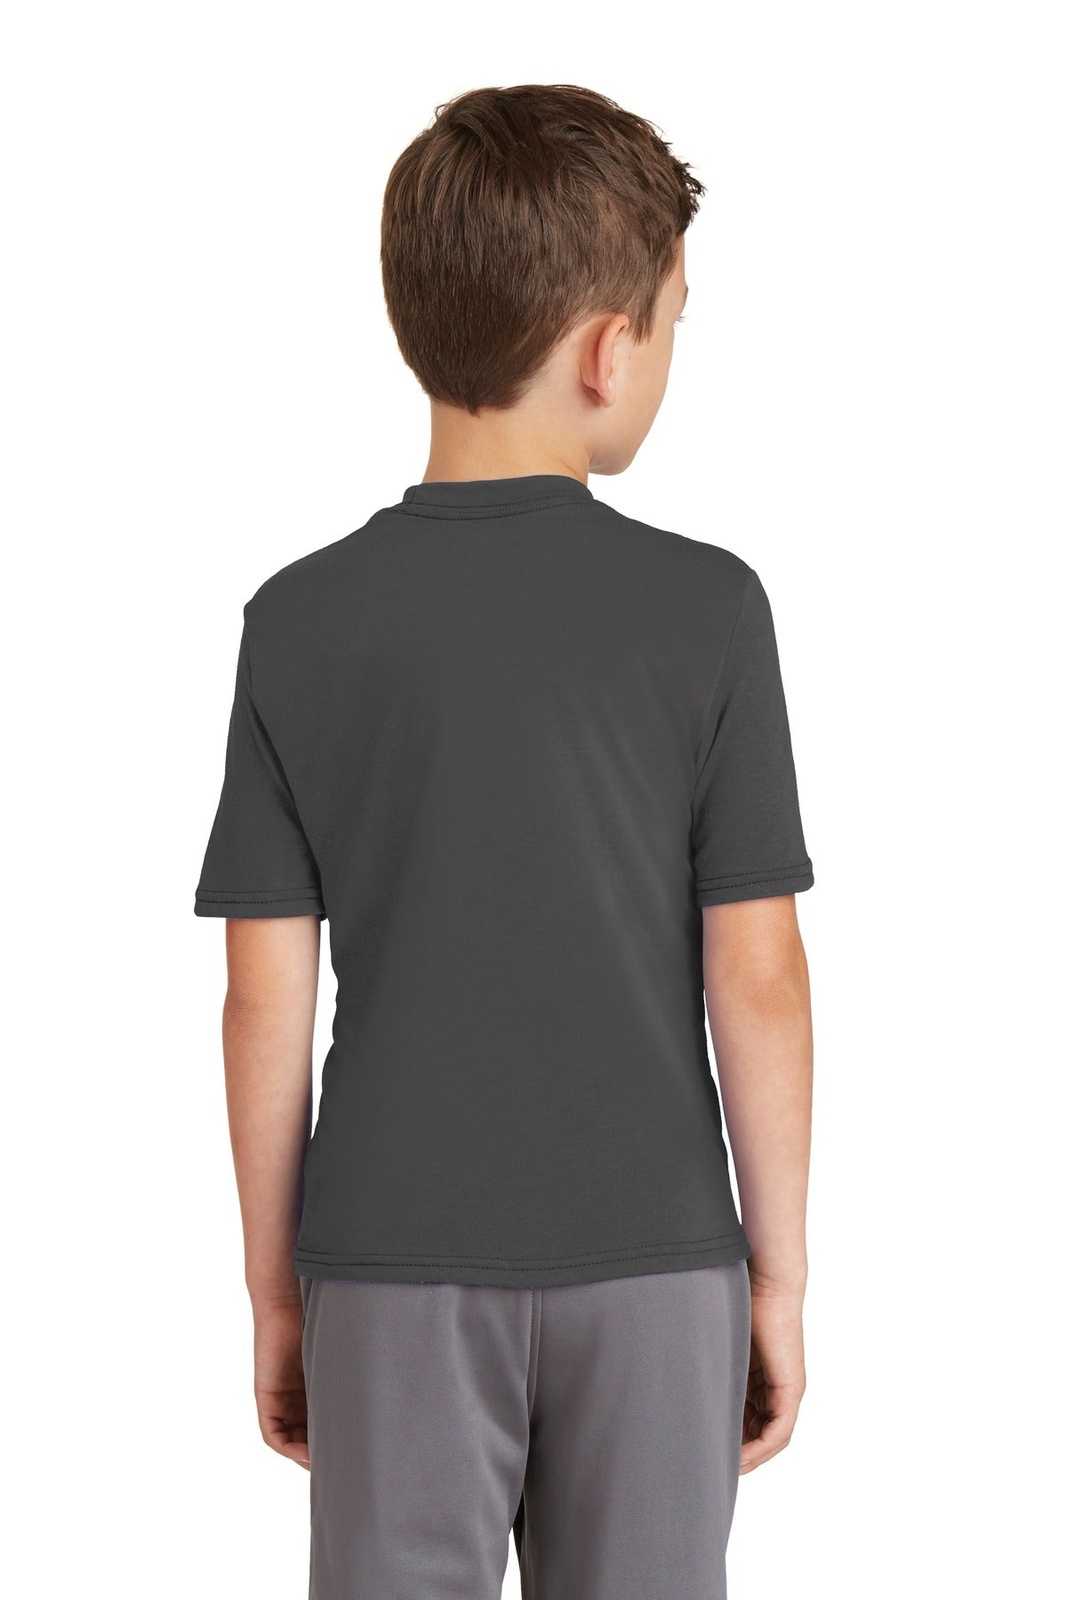 Port & Company PC381Y Youth Performance Blend Tee - Charcoal - HIT a Double - 1